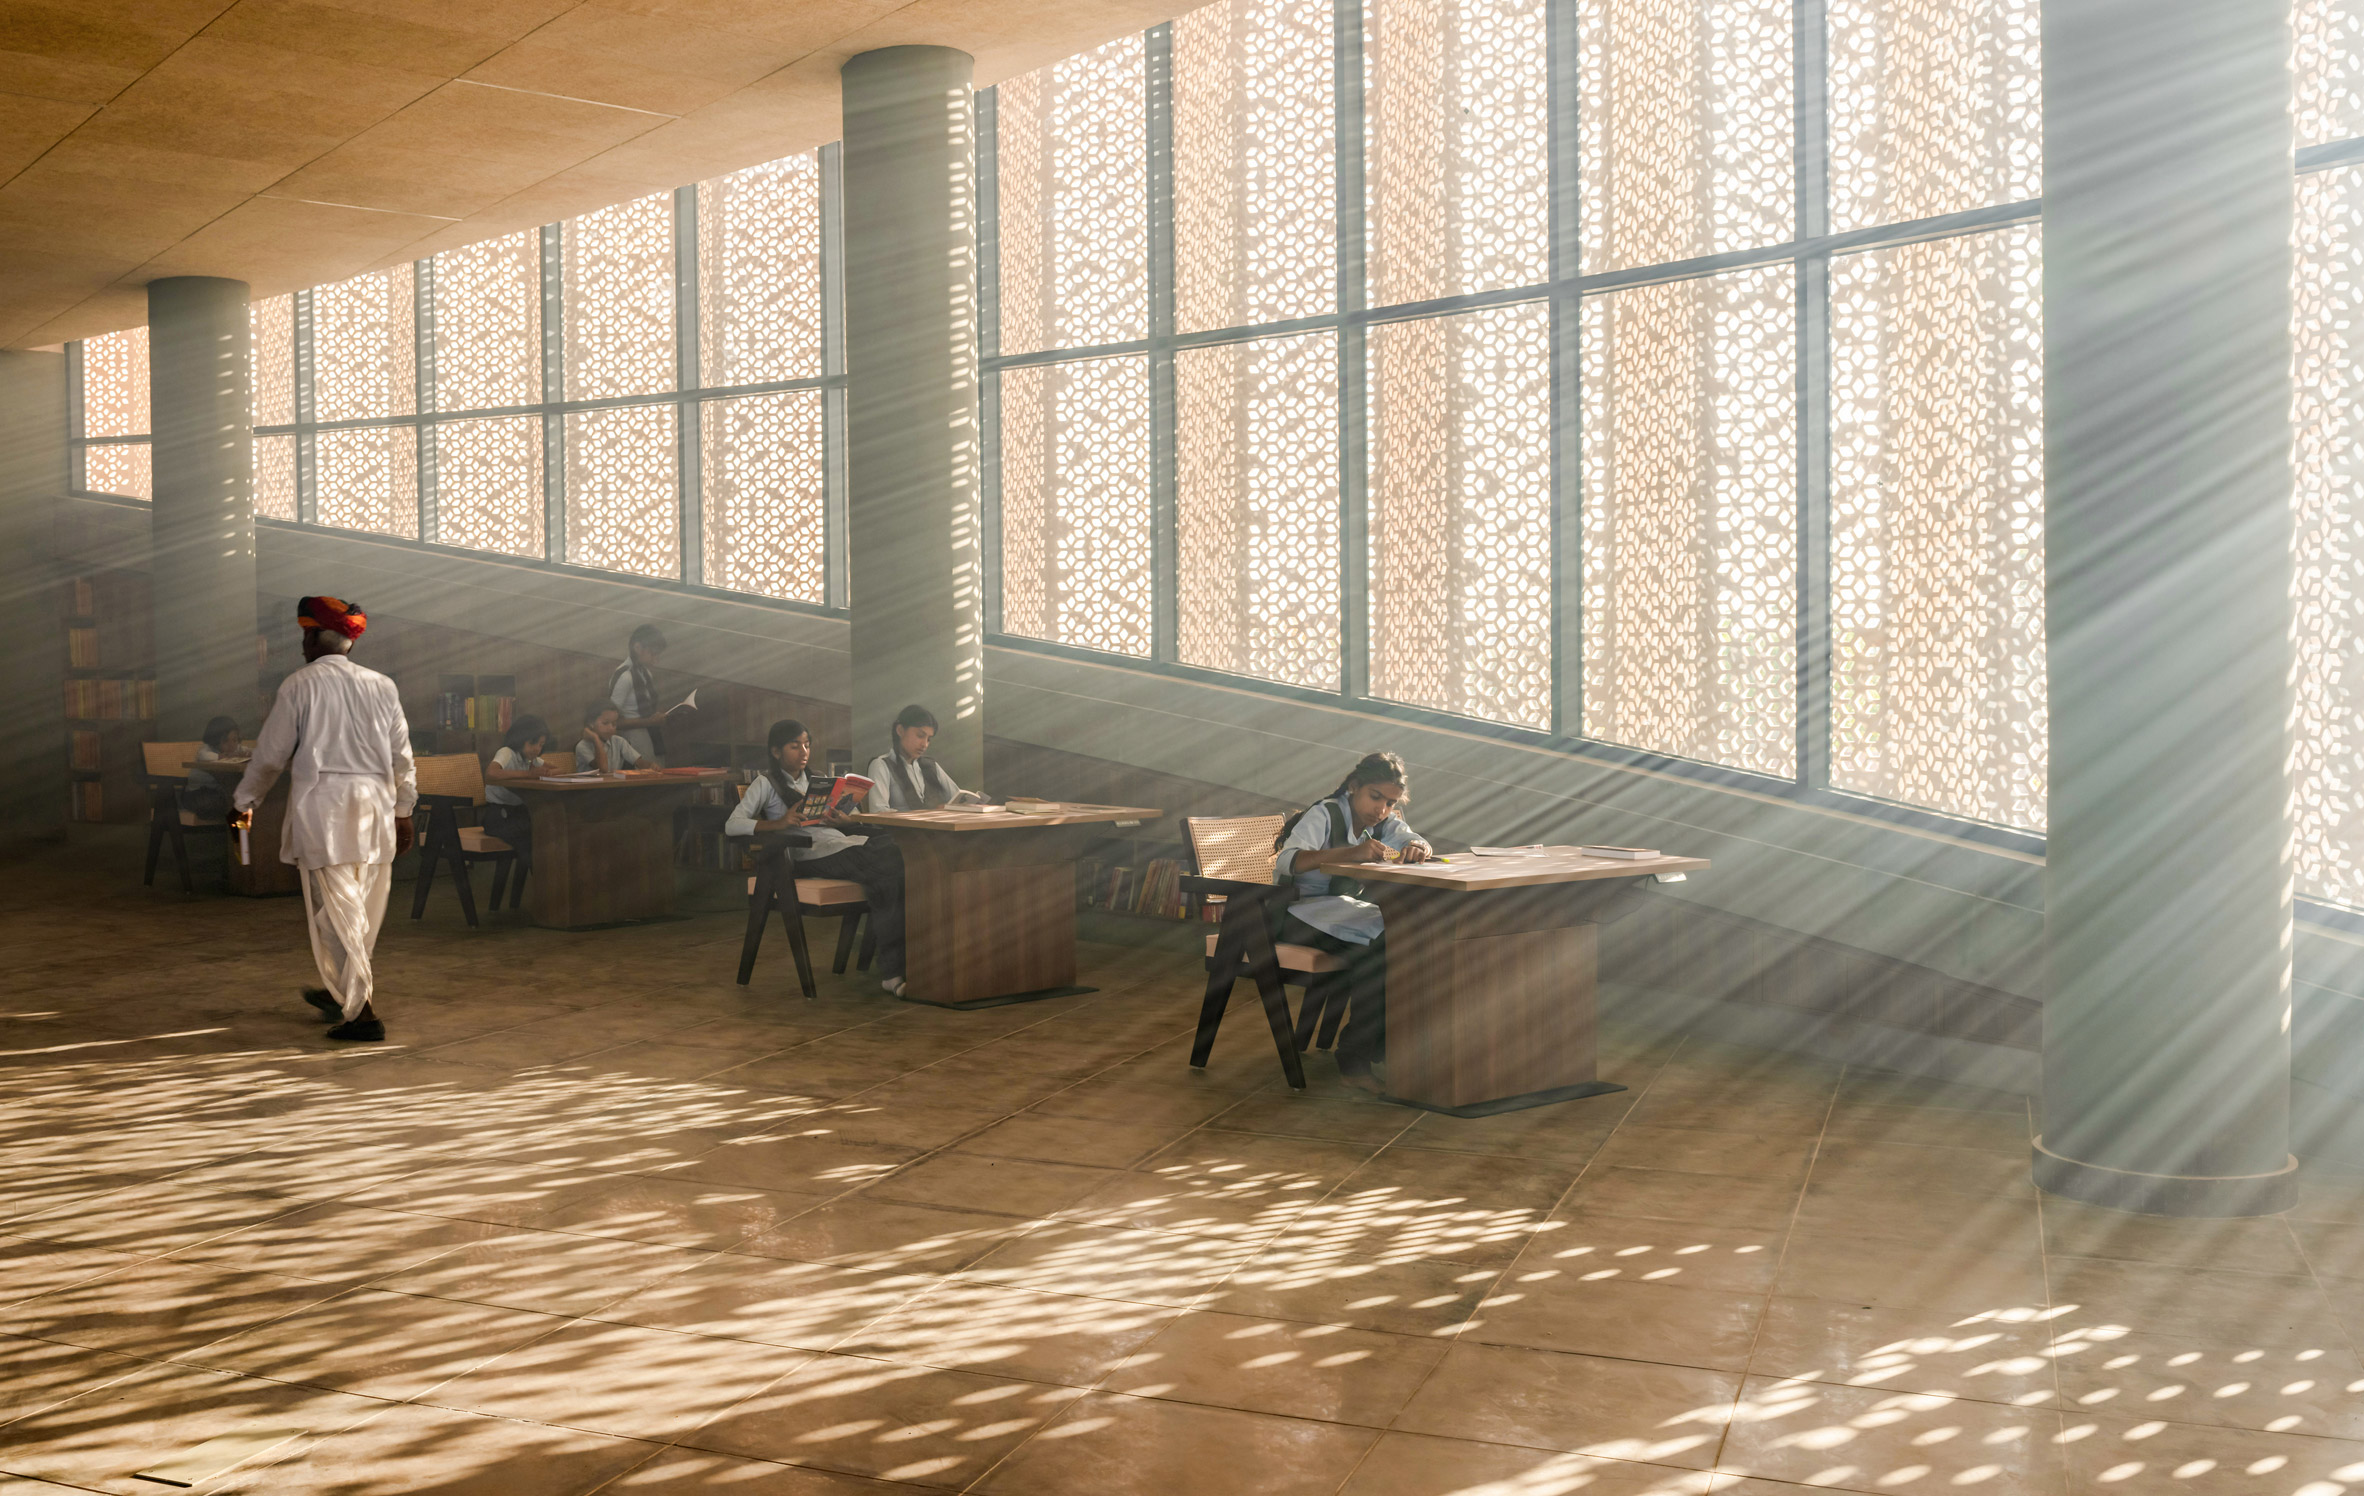 Internal library and learning space in Nokha Village Community Centre by Sanjay Puri Architects in India